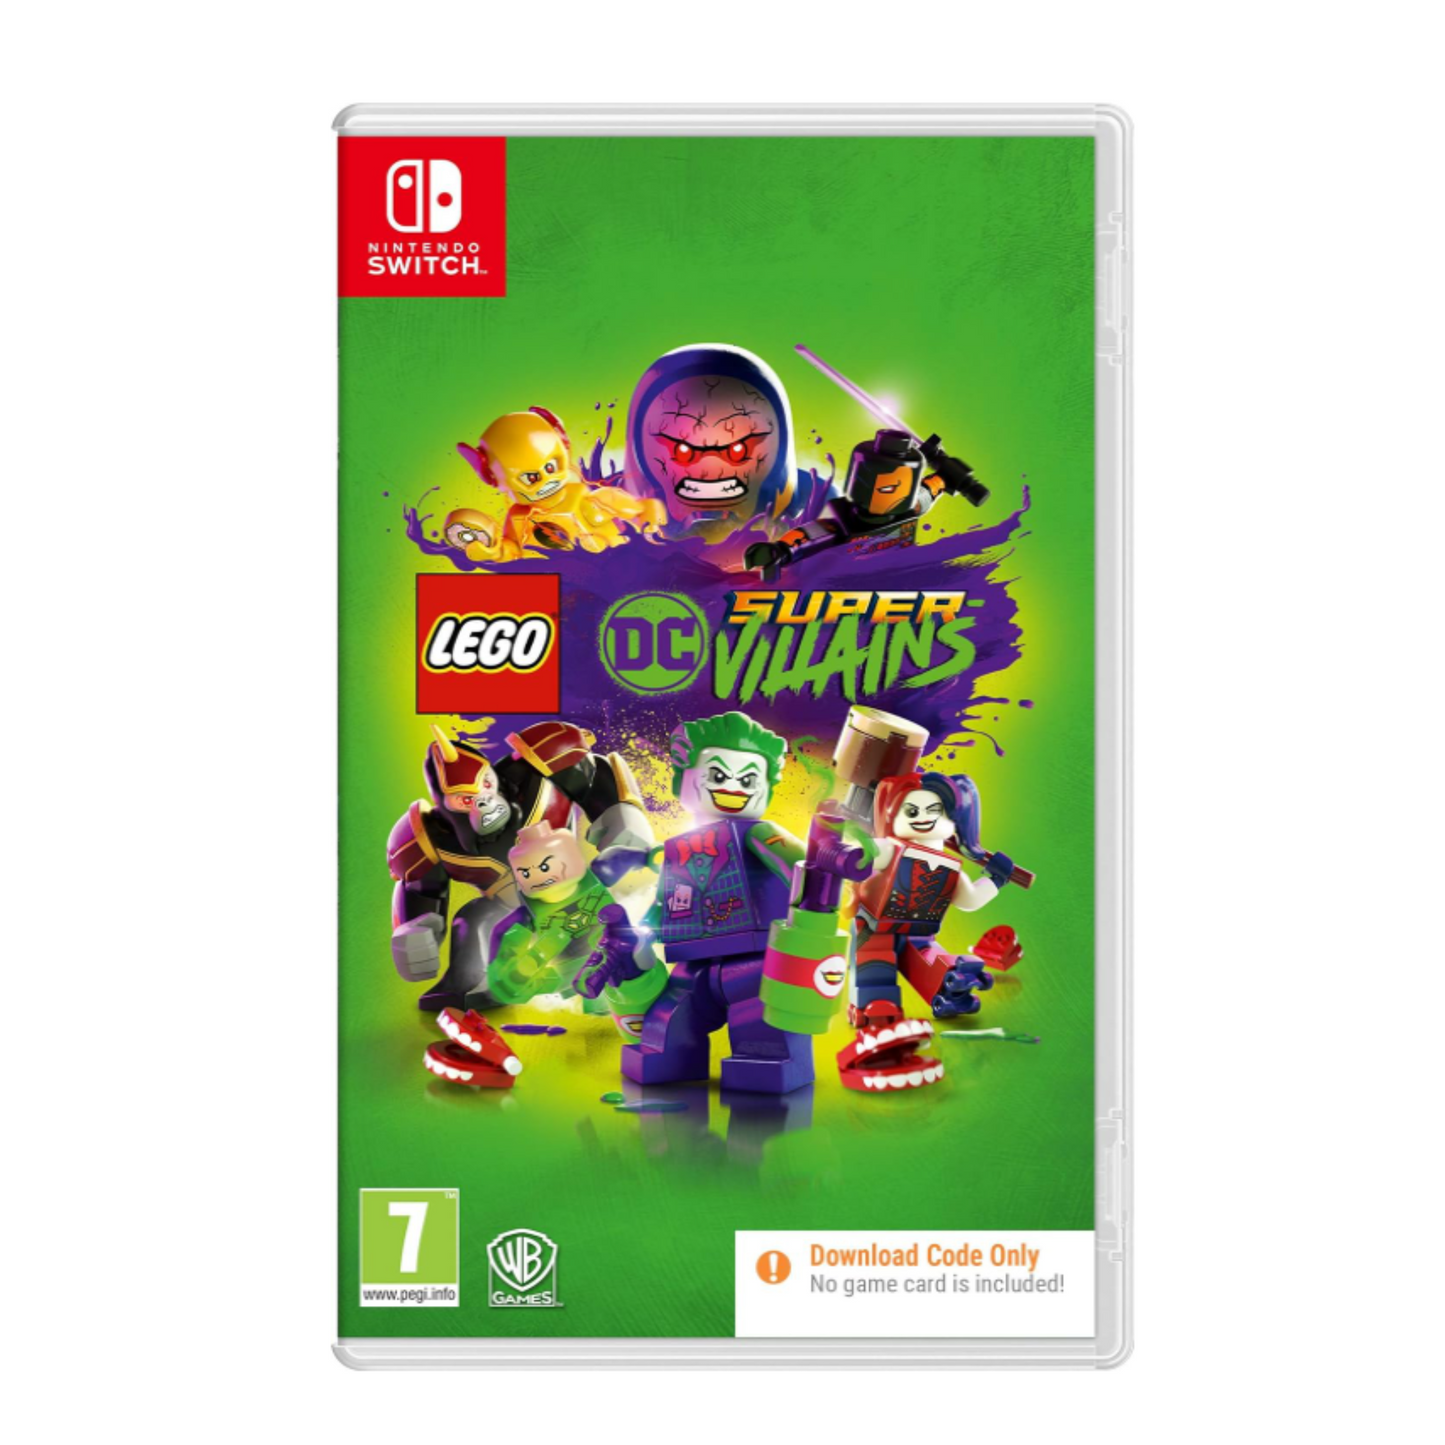 Lego DC Super Villains Video Game for Nintendo Switch